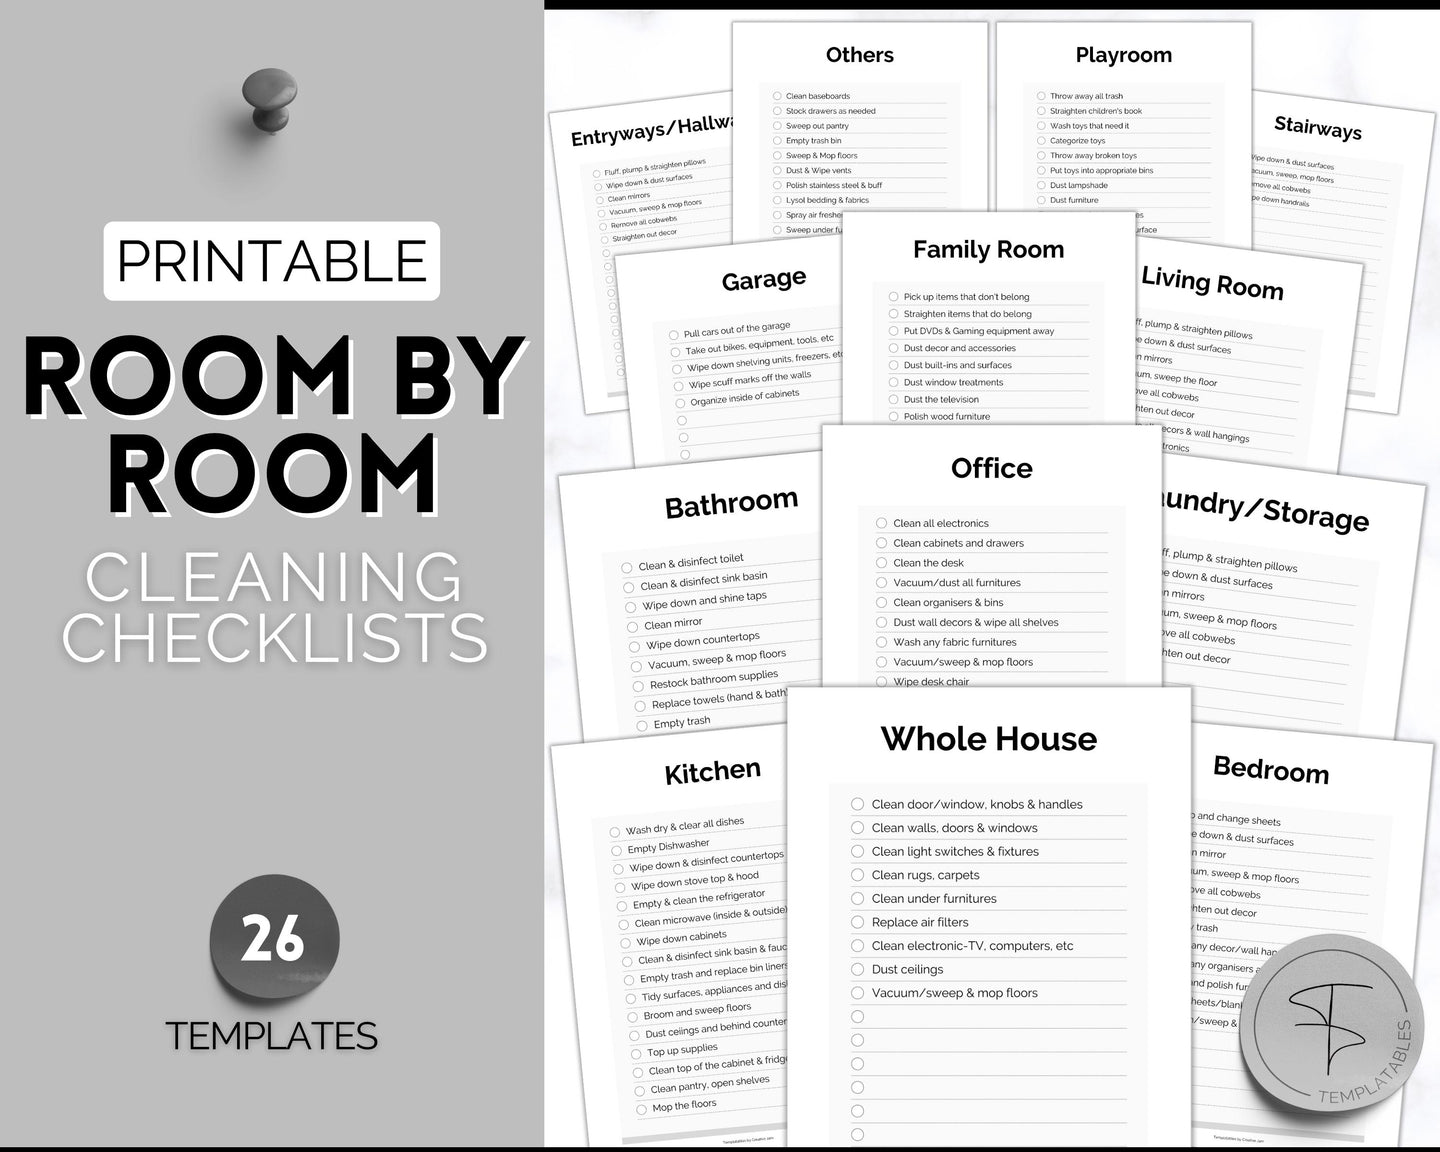 Cleaning Checklist, Printable Room by room Cleaning Cards | Family & Kids Cleaning Schedule Planner & Tracker | Mono